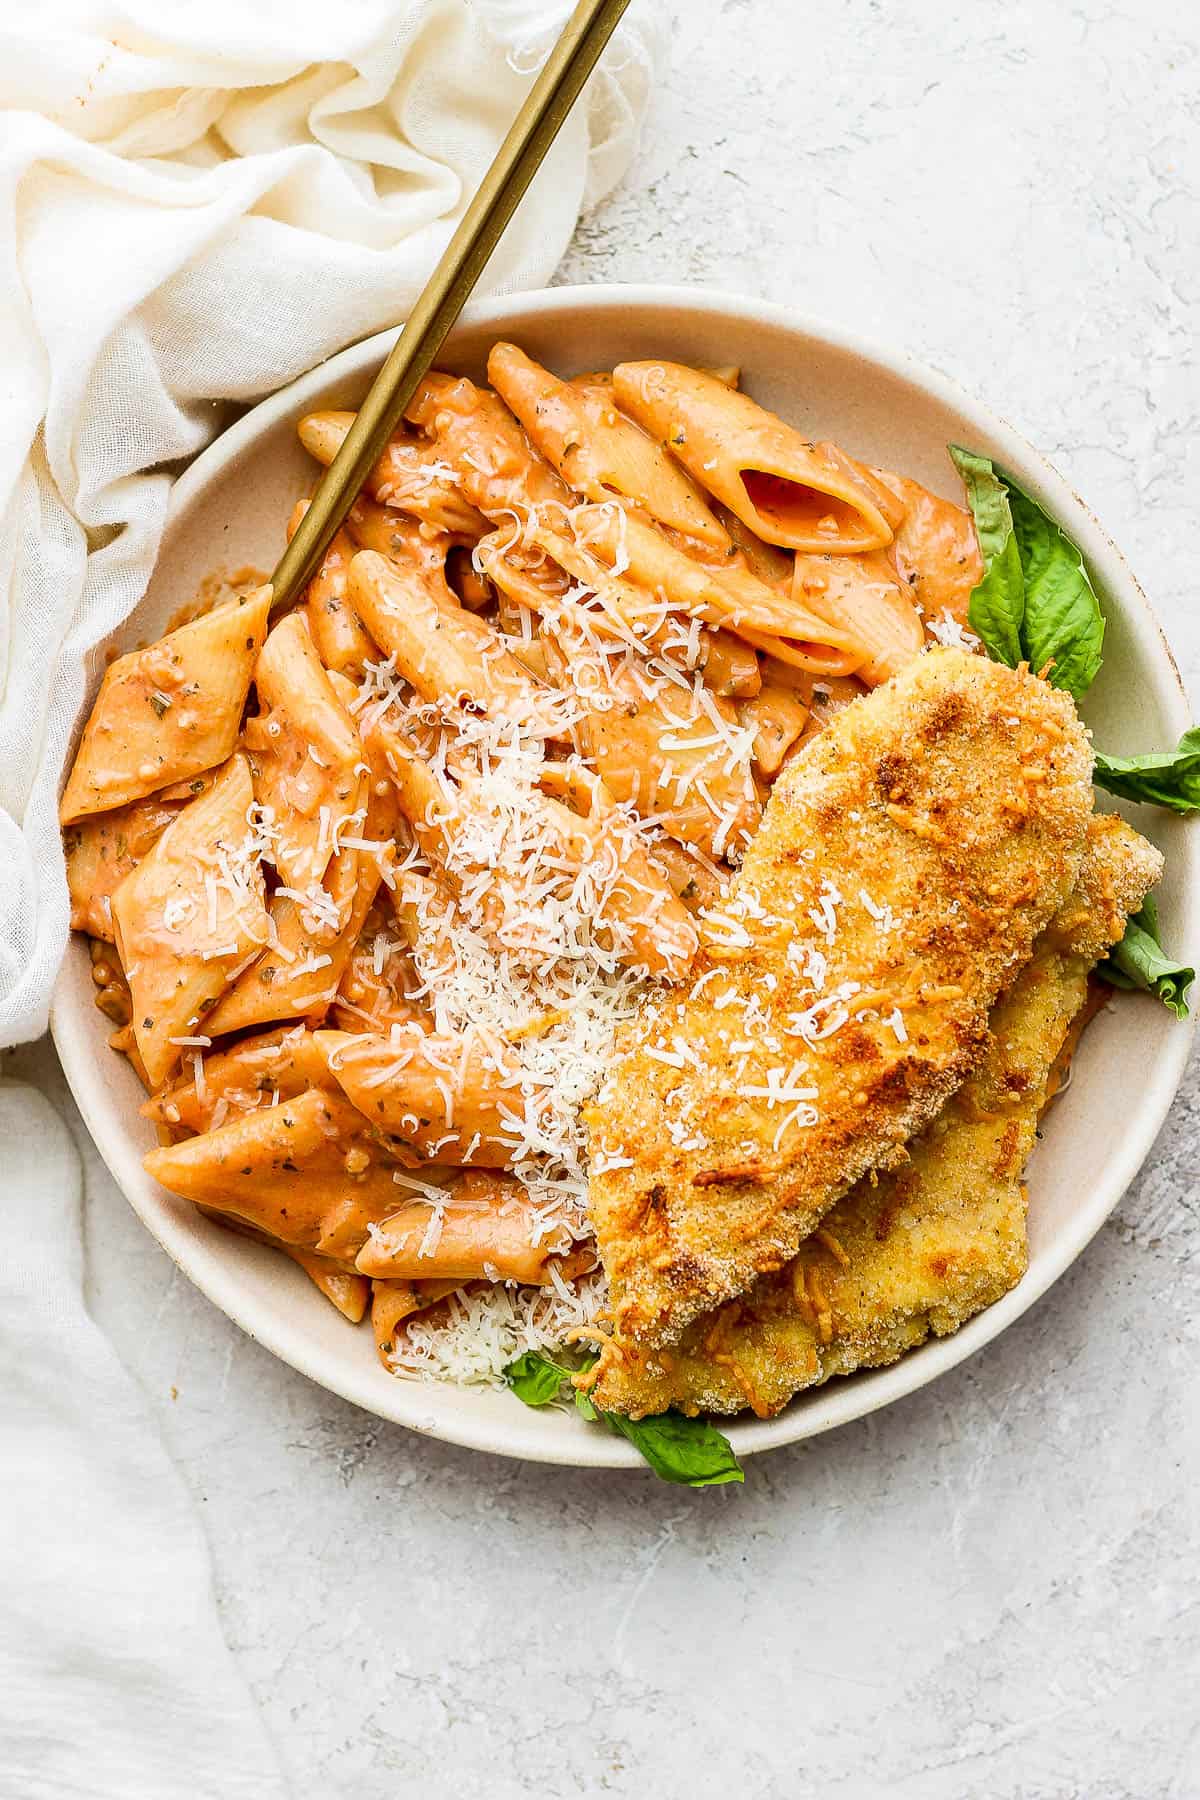 Creamy tomato pasta in a shallow dish with baked chicken cutlets.